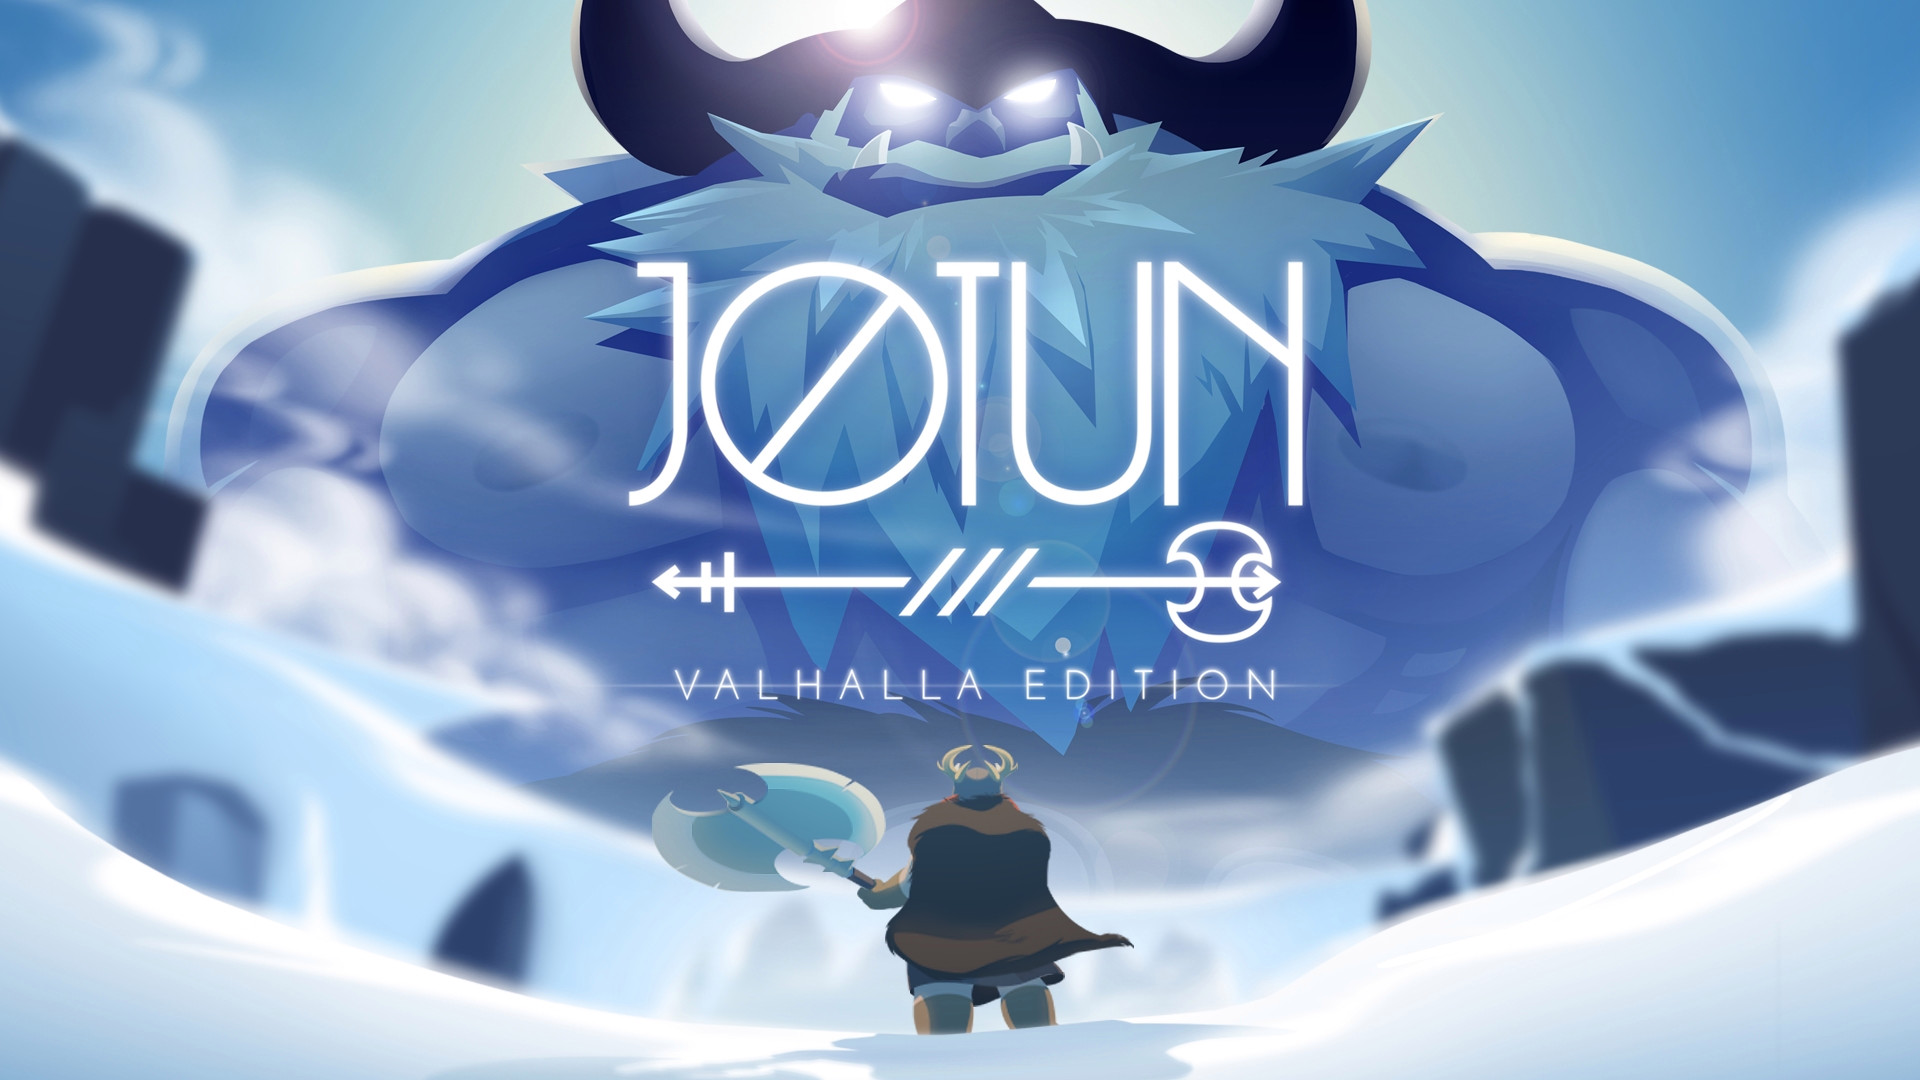 Game Re Jotun Valhalla Edition Is A 2d Shadow Of The